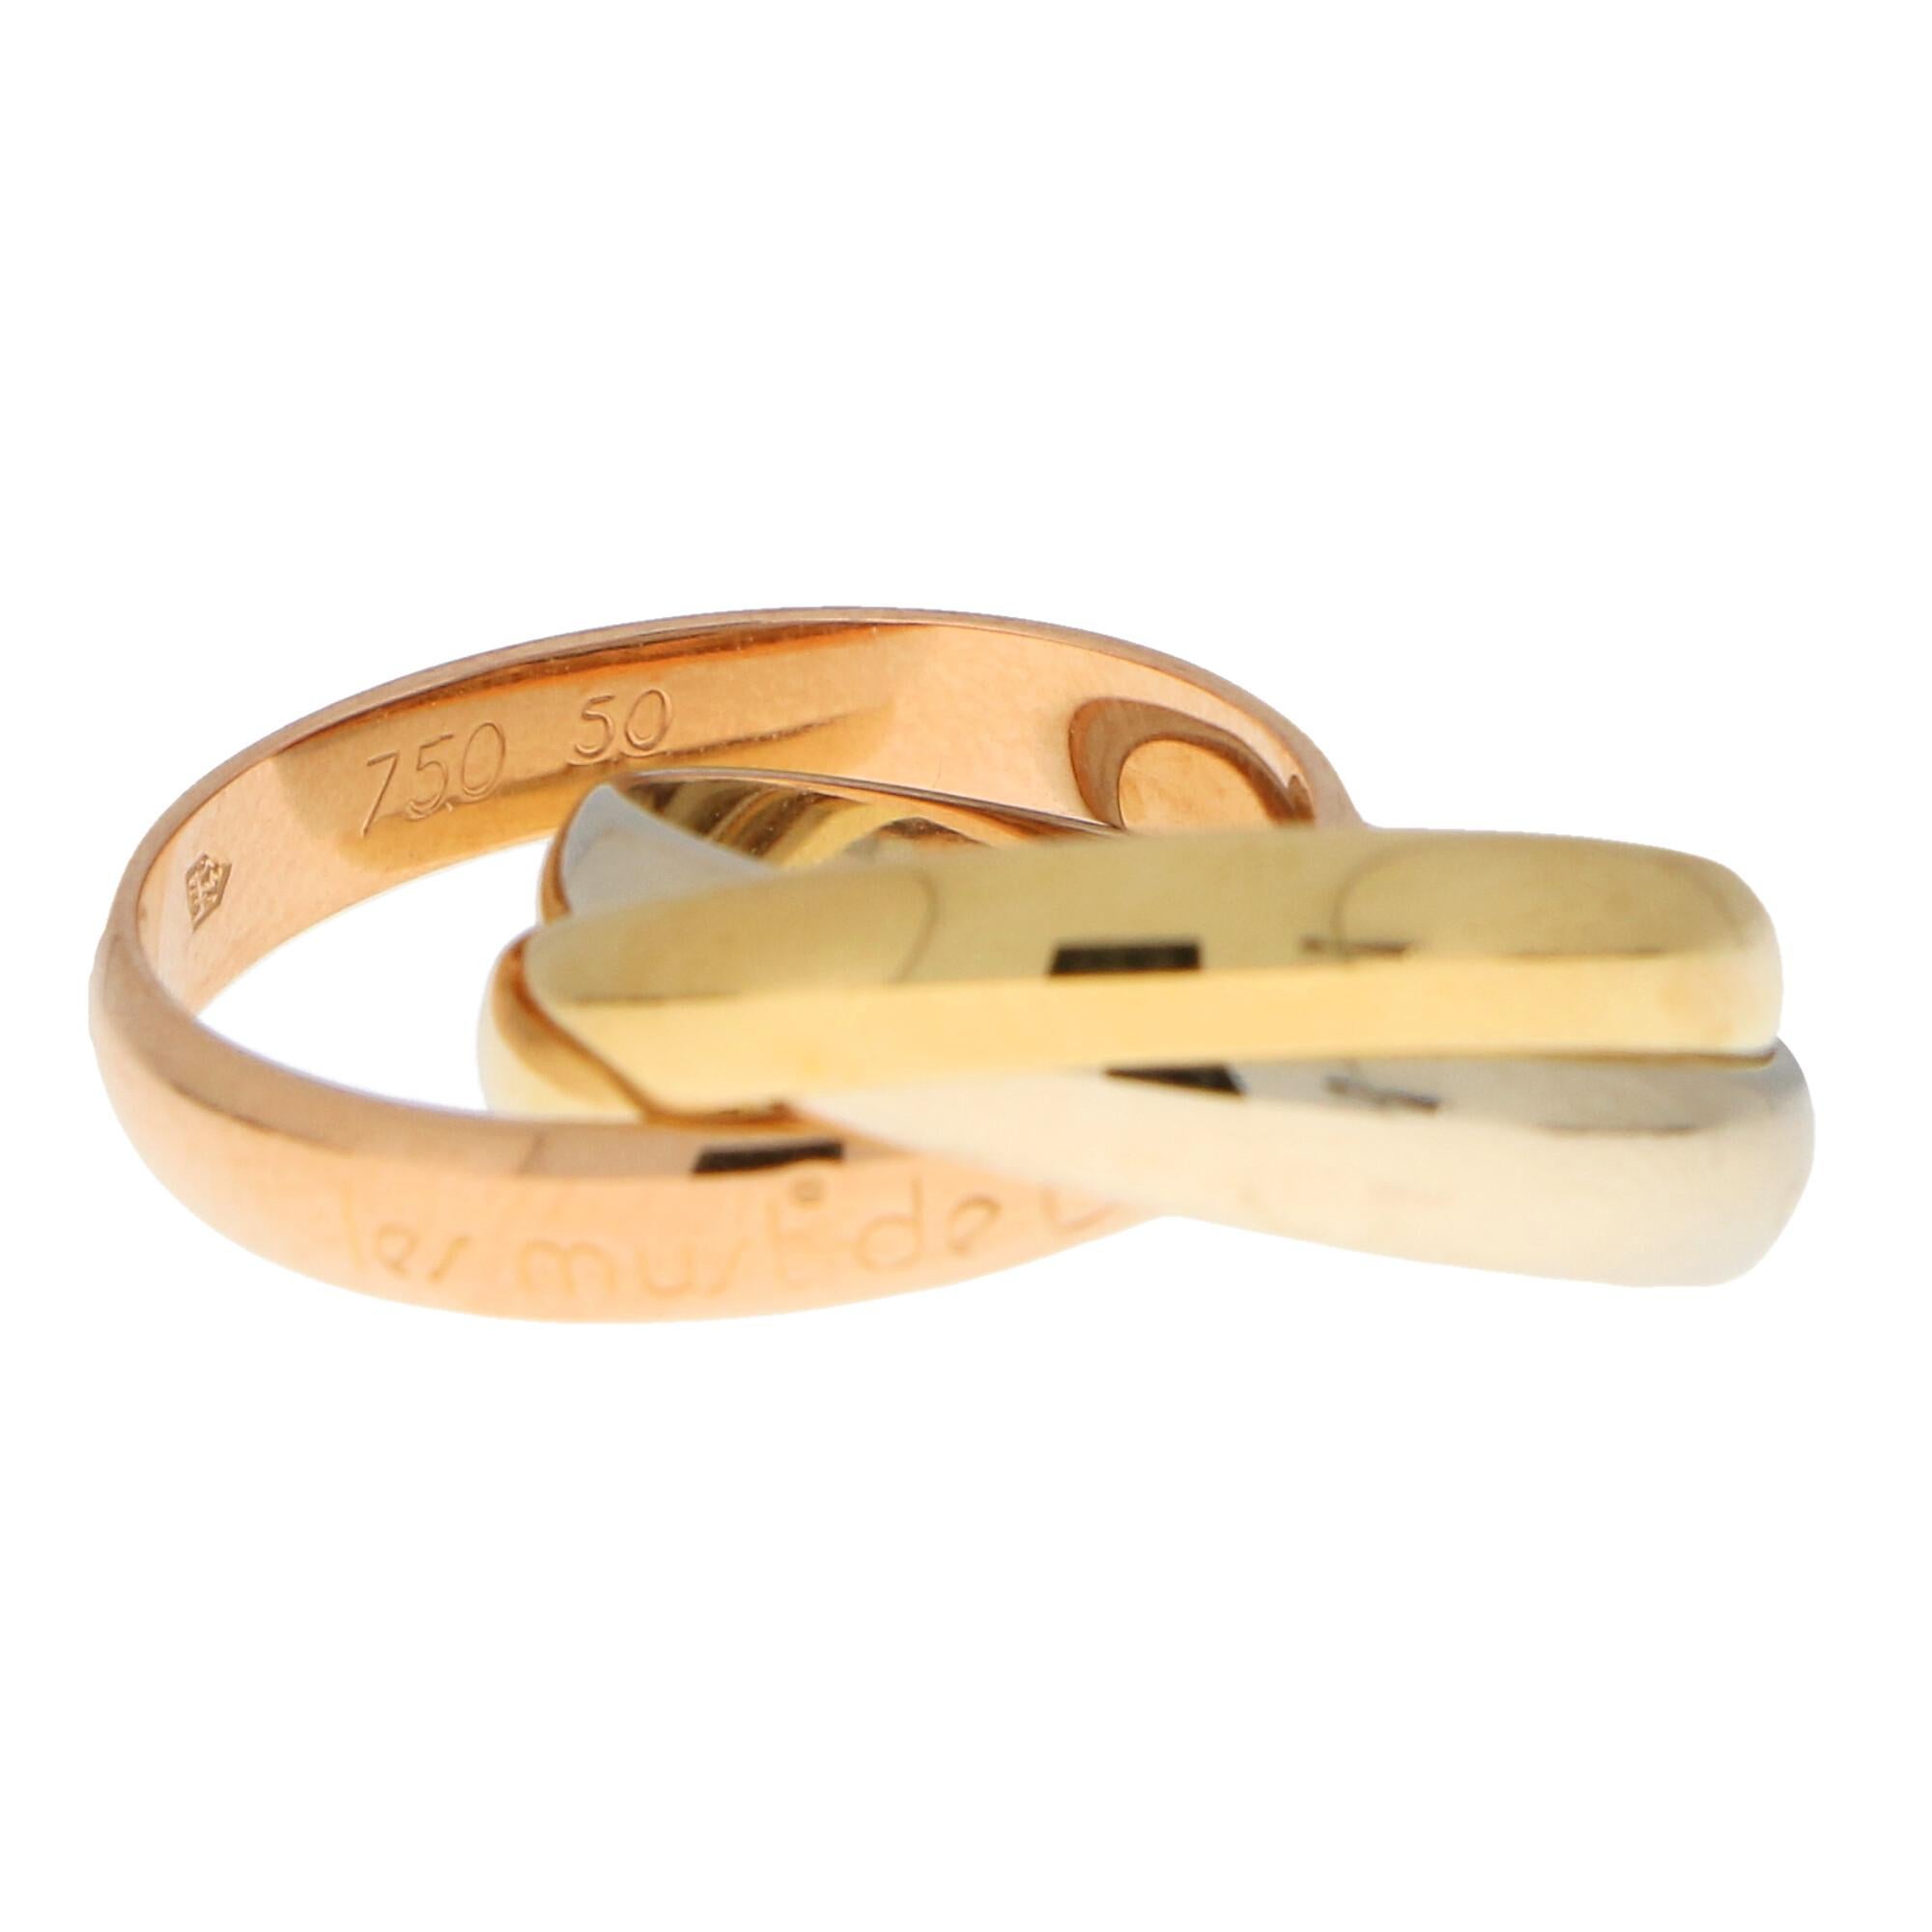 A classic Les Must De Cartier trinity ring set in 18k yellow, rose and white gold.

The ring is composed of three interlinked 3.5-millimetre bands that are designed to roll with ease on the finger. The colour difference is subtle yet beautiful and